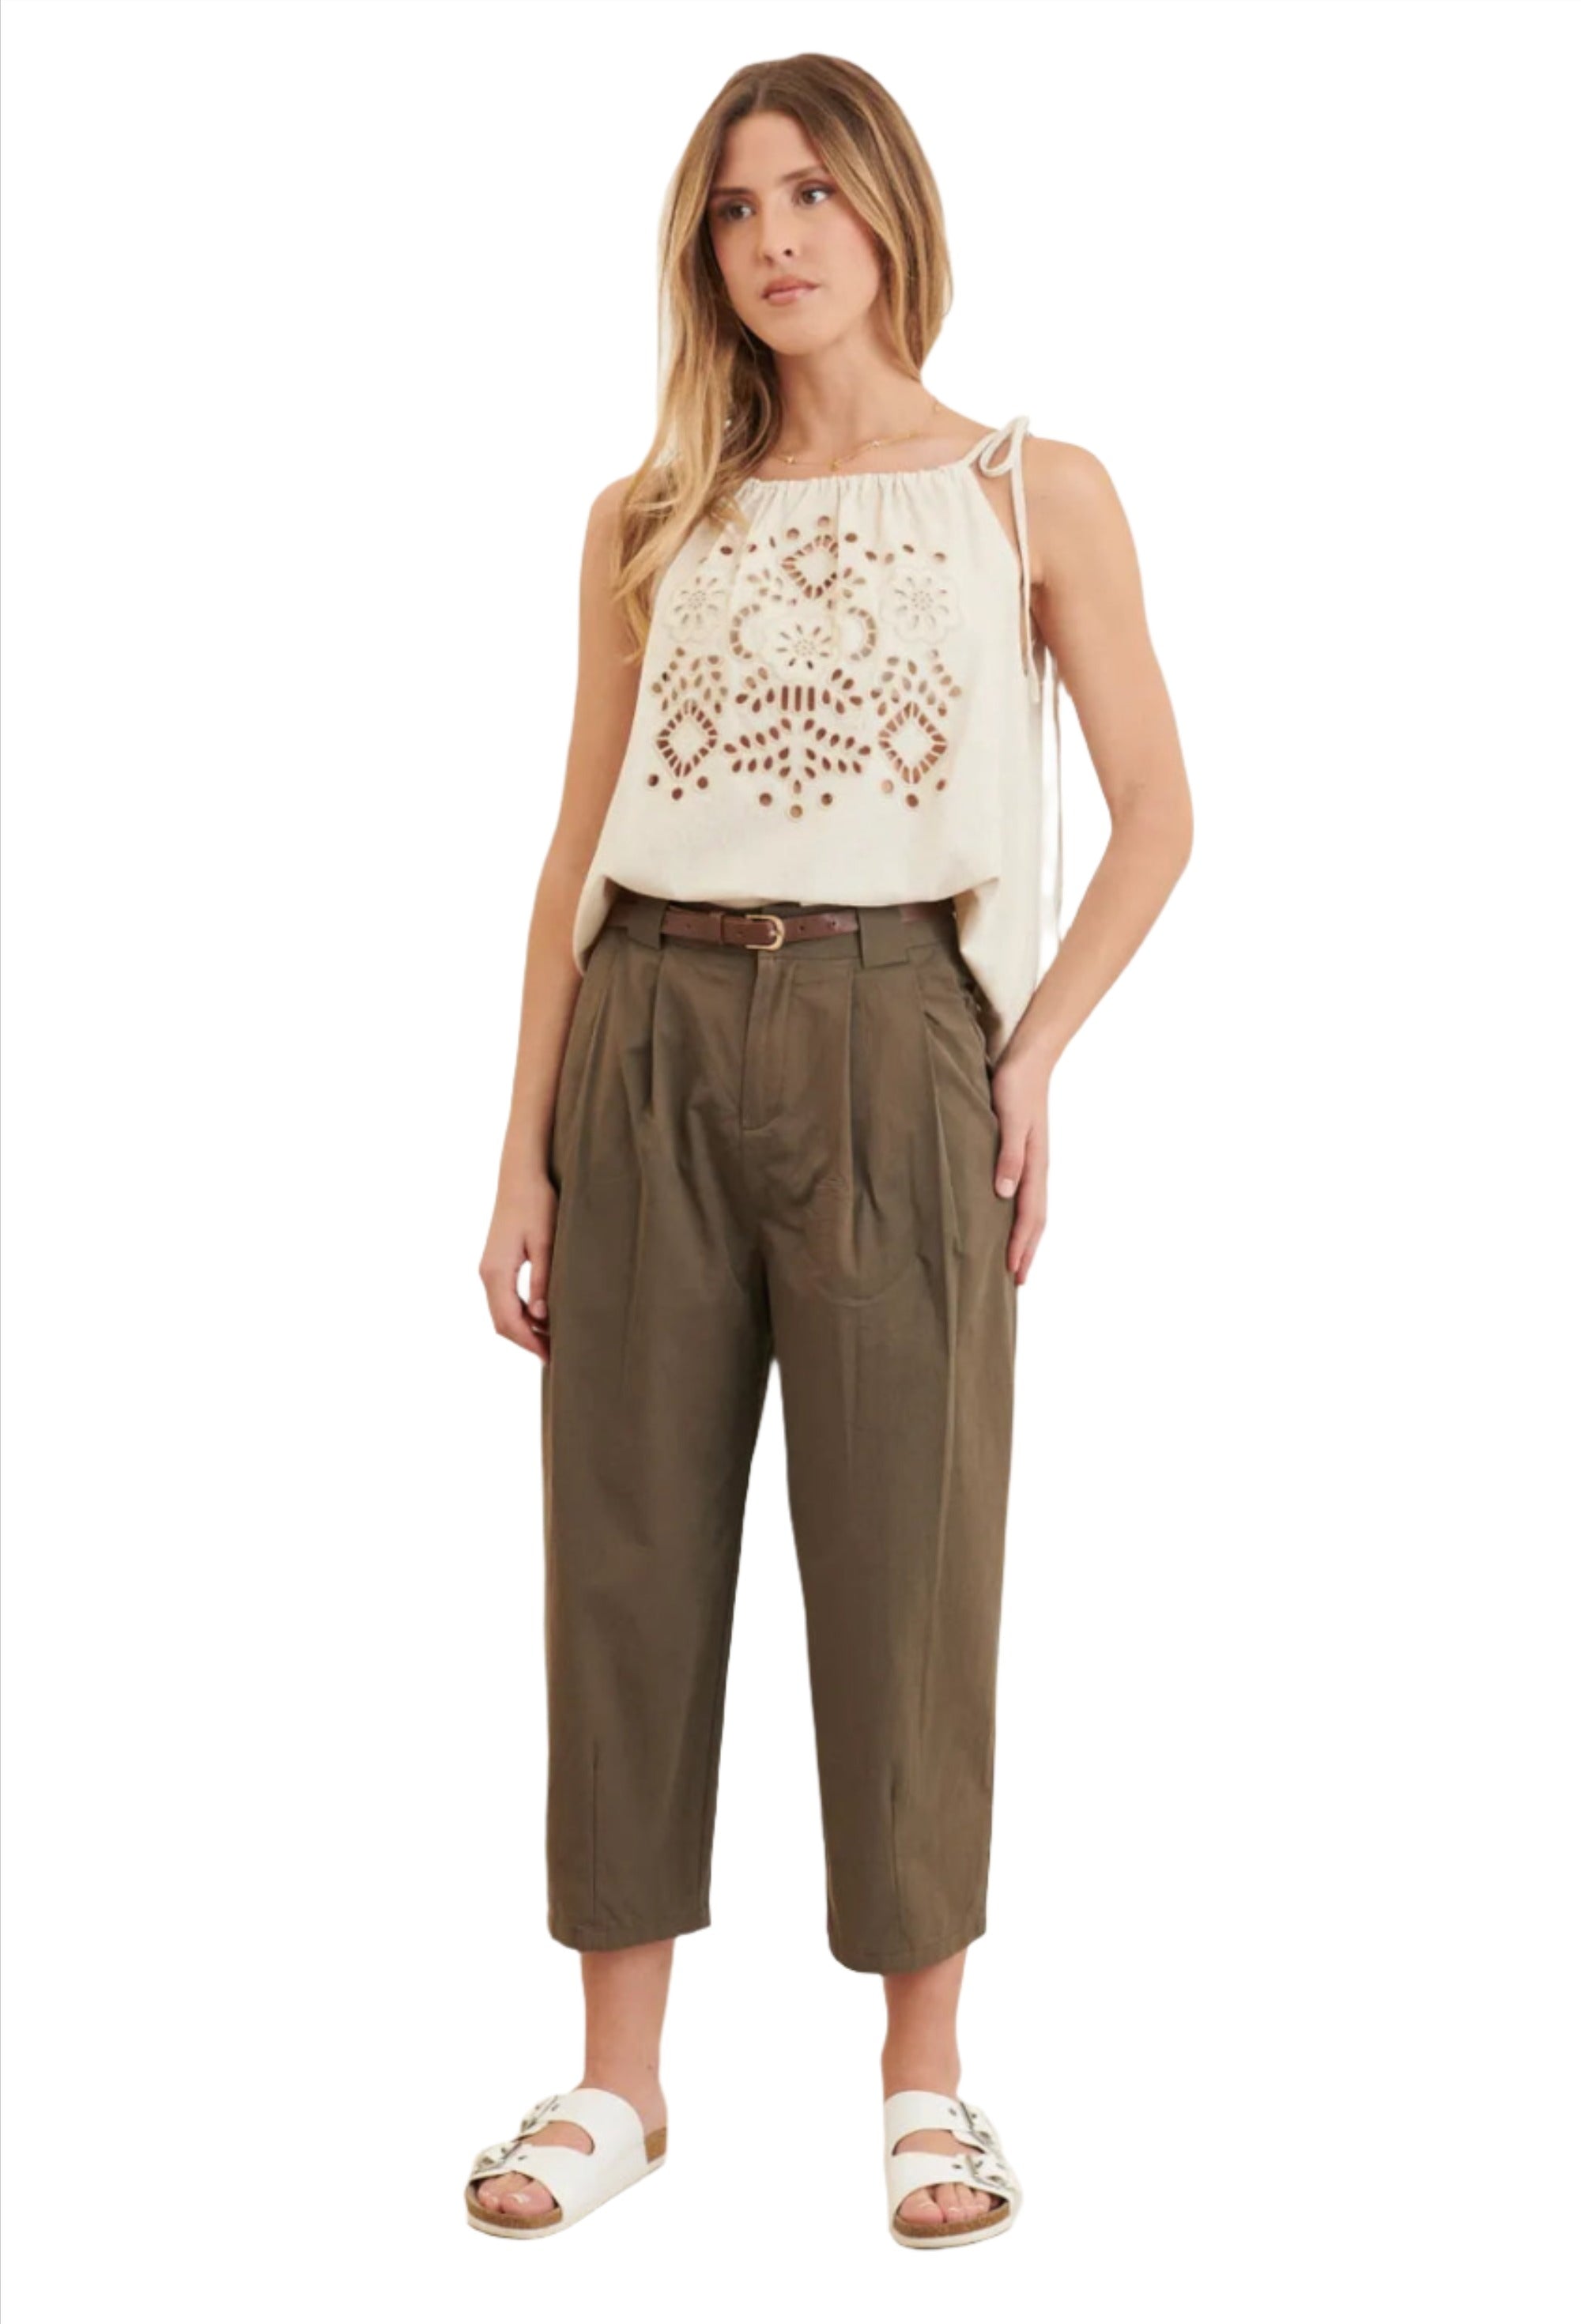 Clever Alice Cropped Pant in Olive Green 